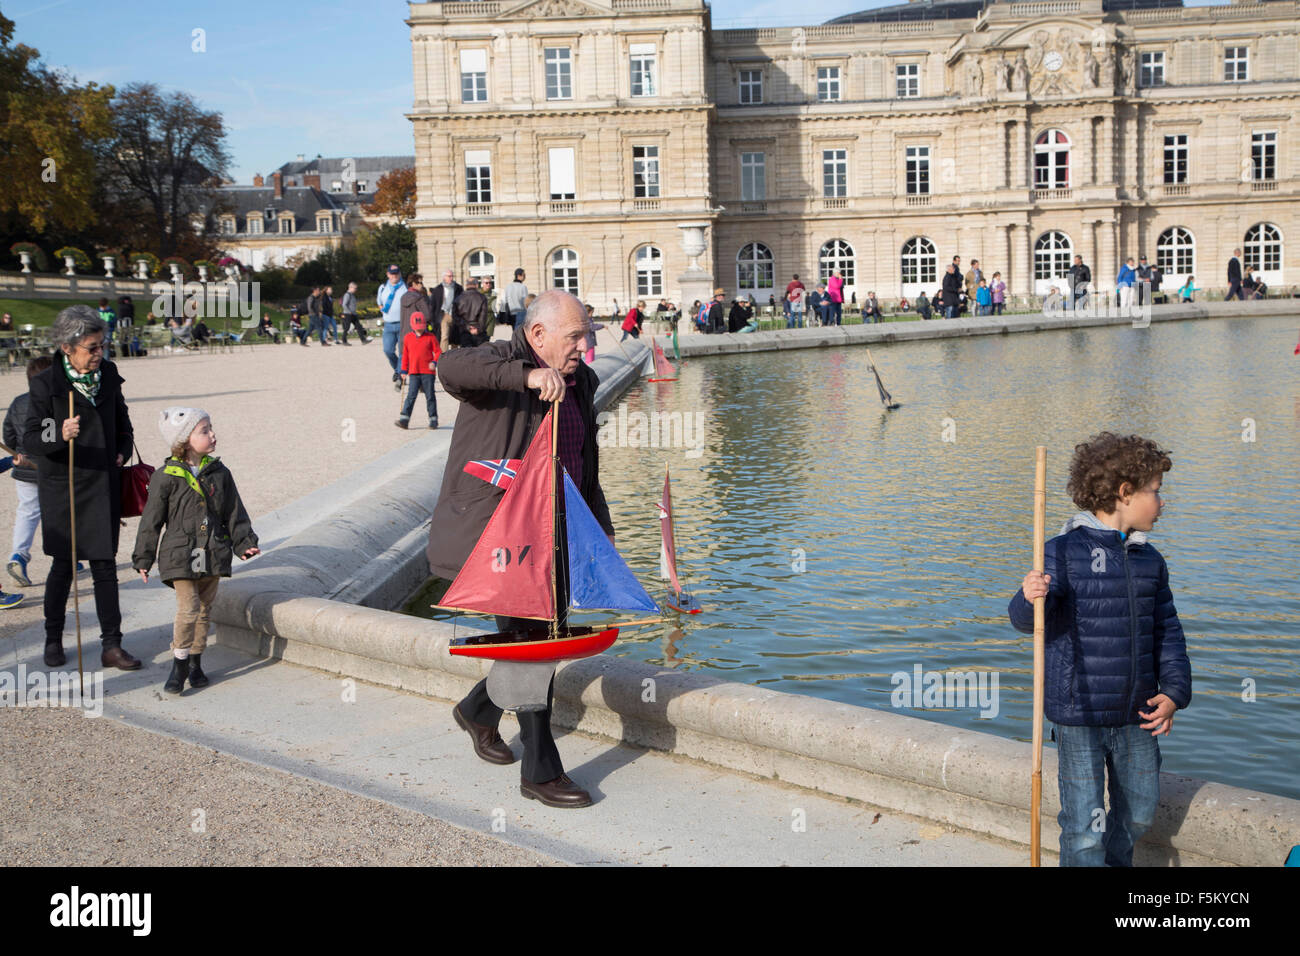 family playing with model yachts in jardin du luxembourg, paris france Stock Photo